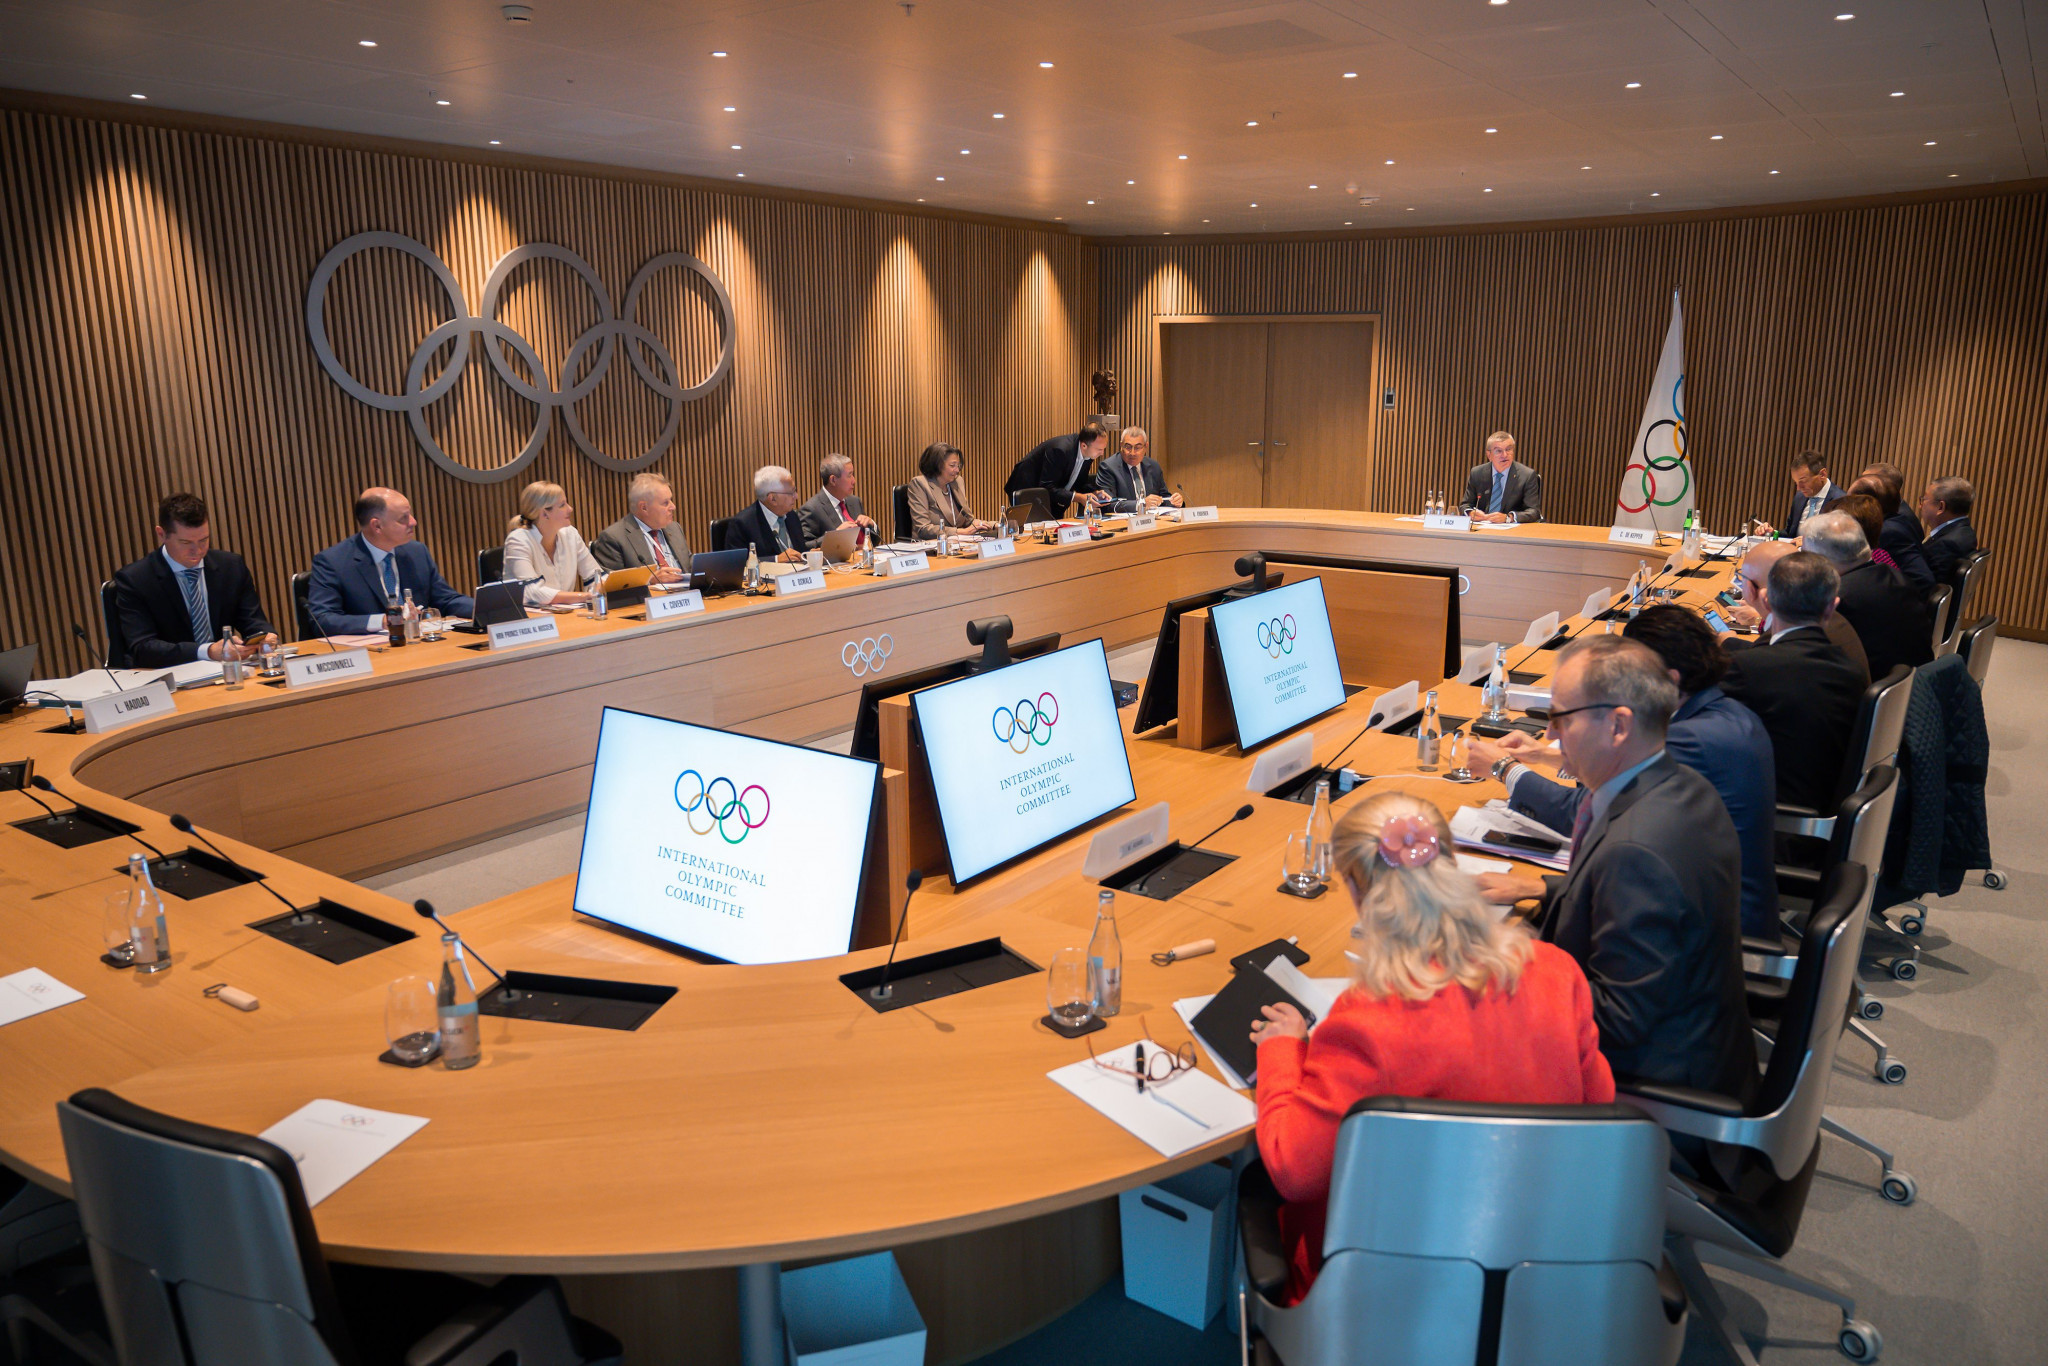 Leading figures in the Olympic Movement have condemned Russia doping manipulation at the IOC Summit in Lausanne ©Getty Images